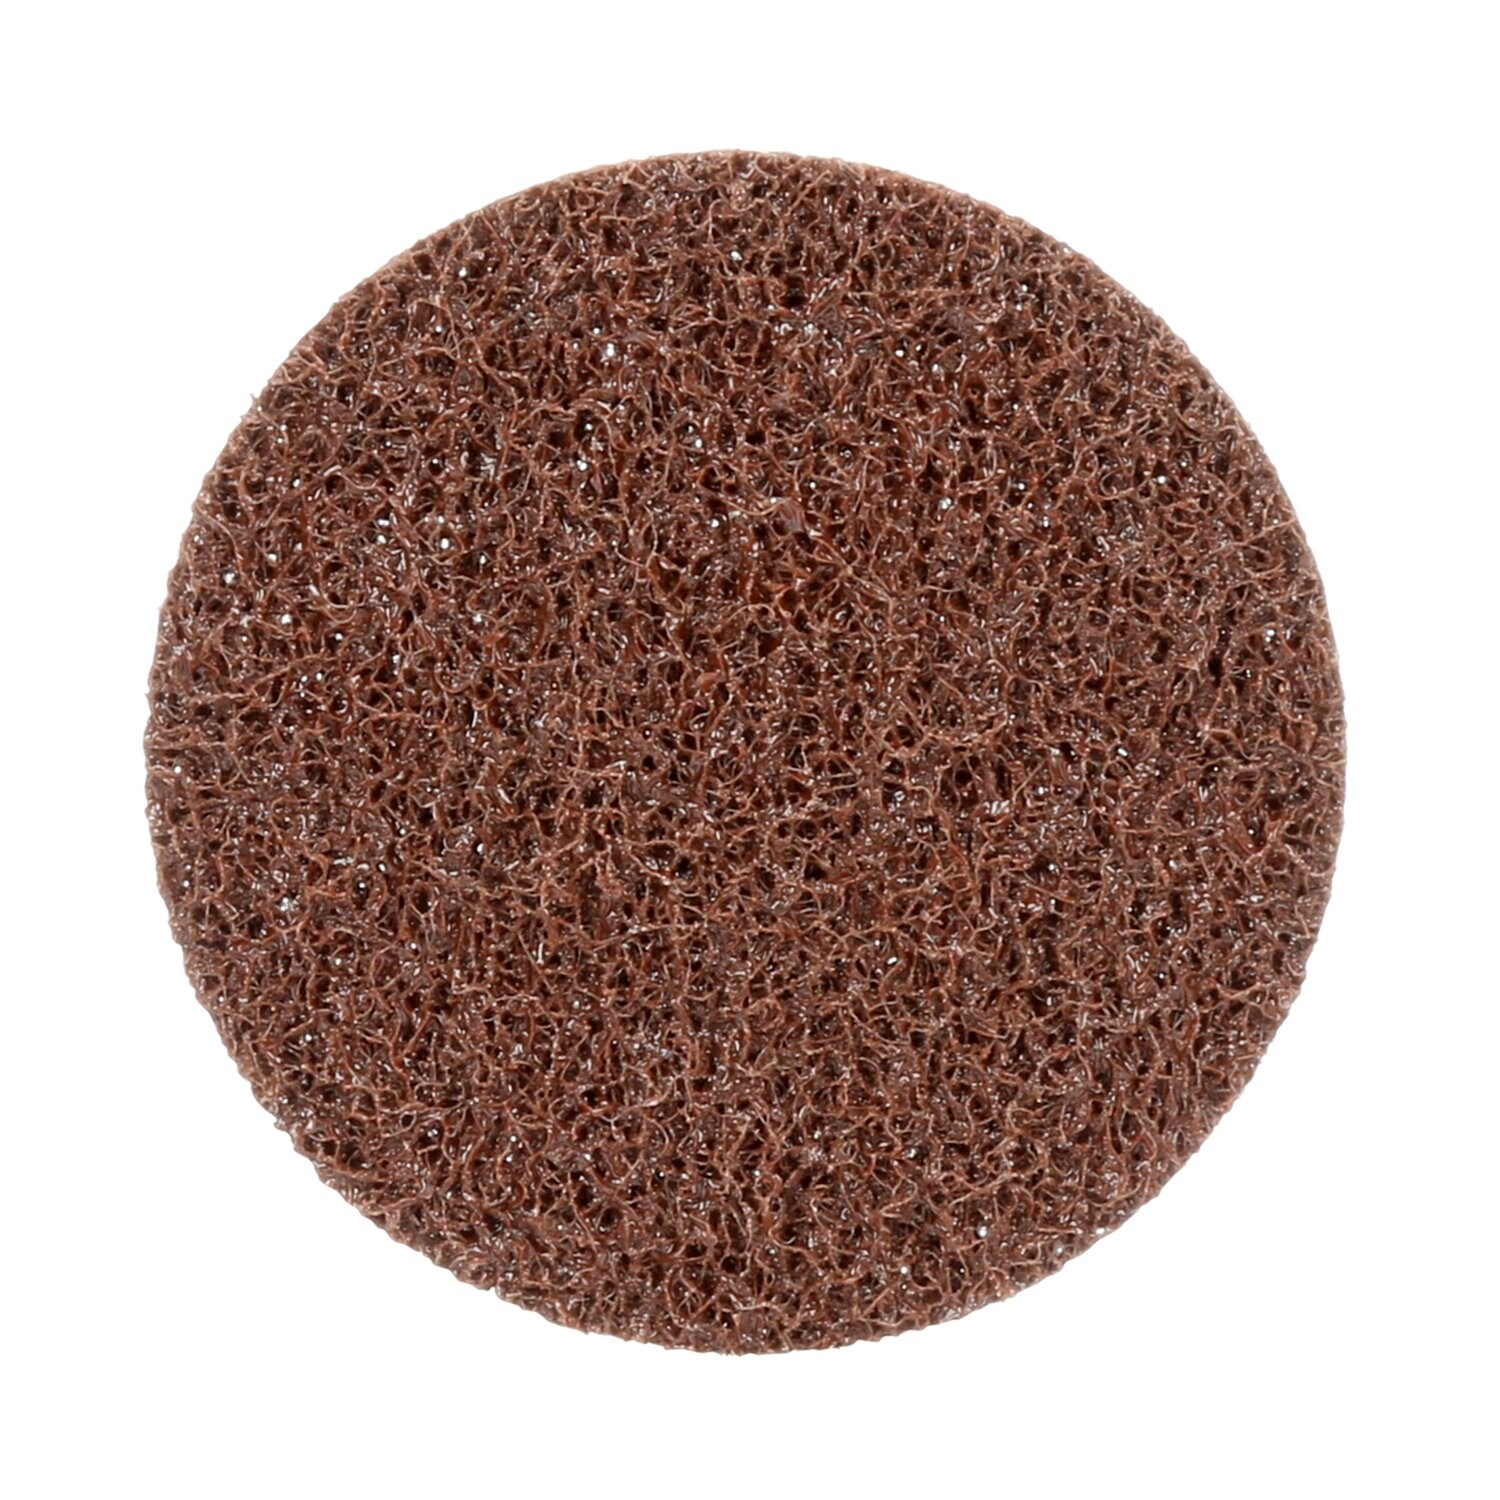 7000121856 - Standard Abrasives Quick Change Surface Conditioning GP Disc, 840487,
A/O Coarse, TR, BRN, 3 in, Die Q300V, 25/Car, 250 ea/Case